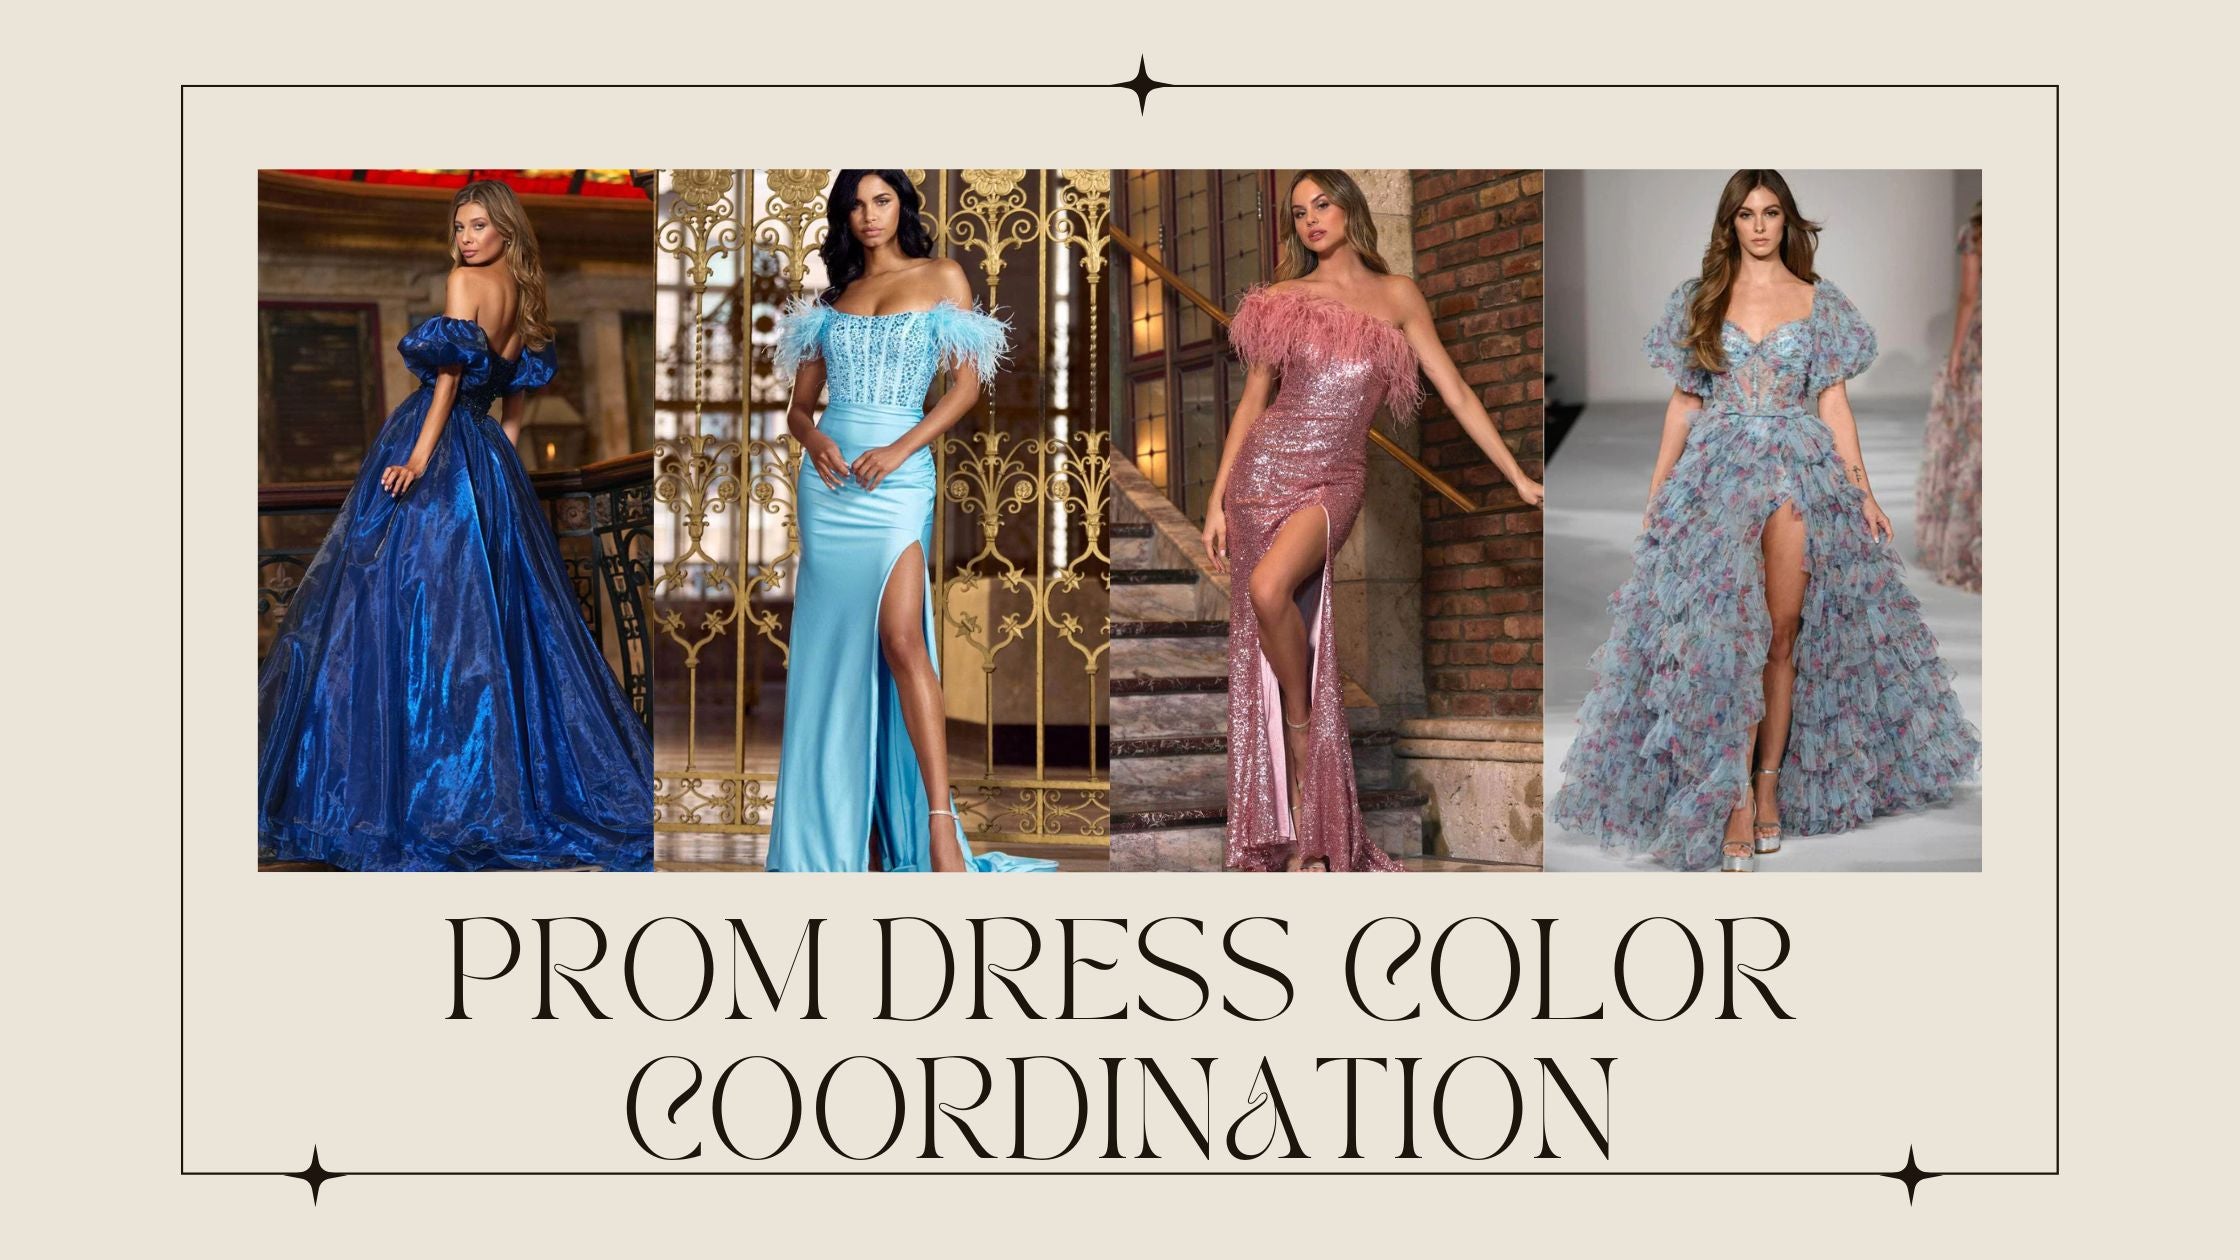 Prom Dress Color Coordination Tips for Dates and Groups